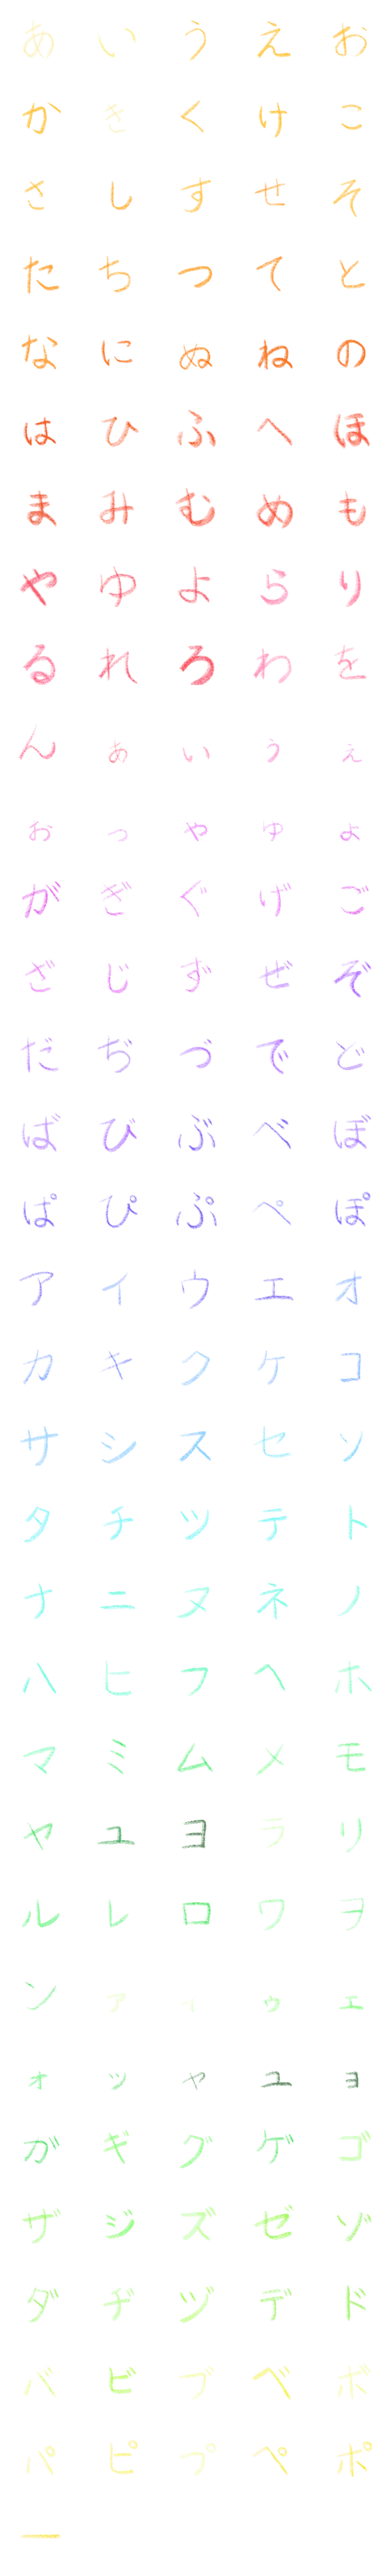 [LINE絵文字]チョーク風な文字の画像一覧